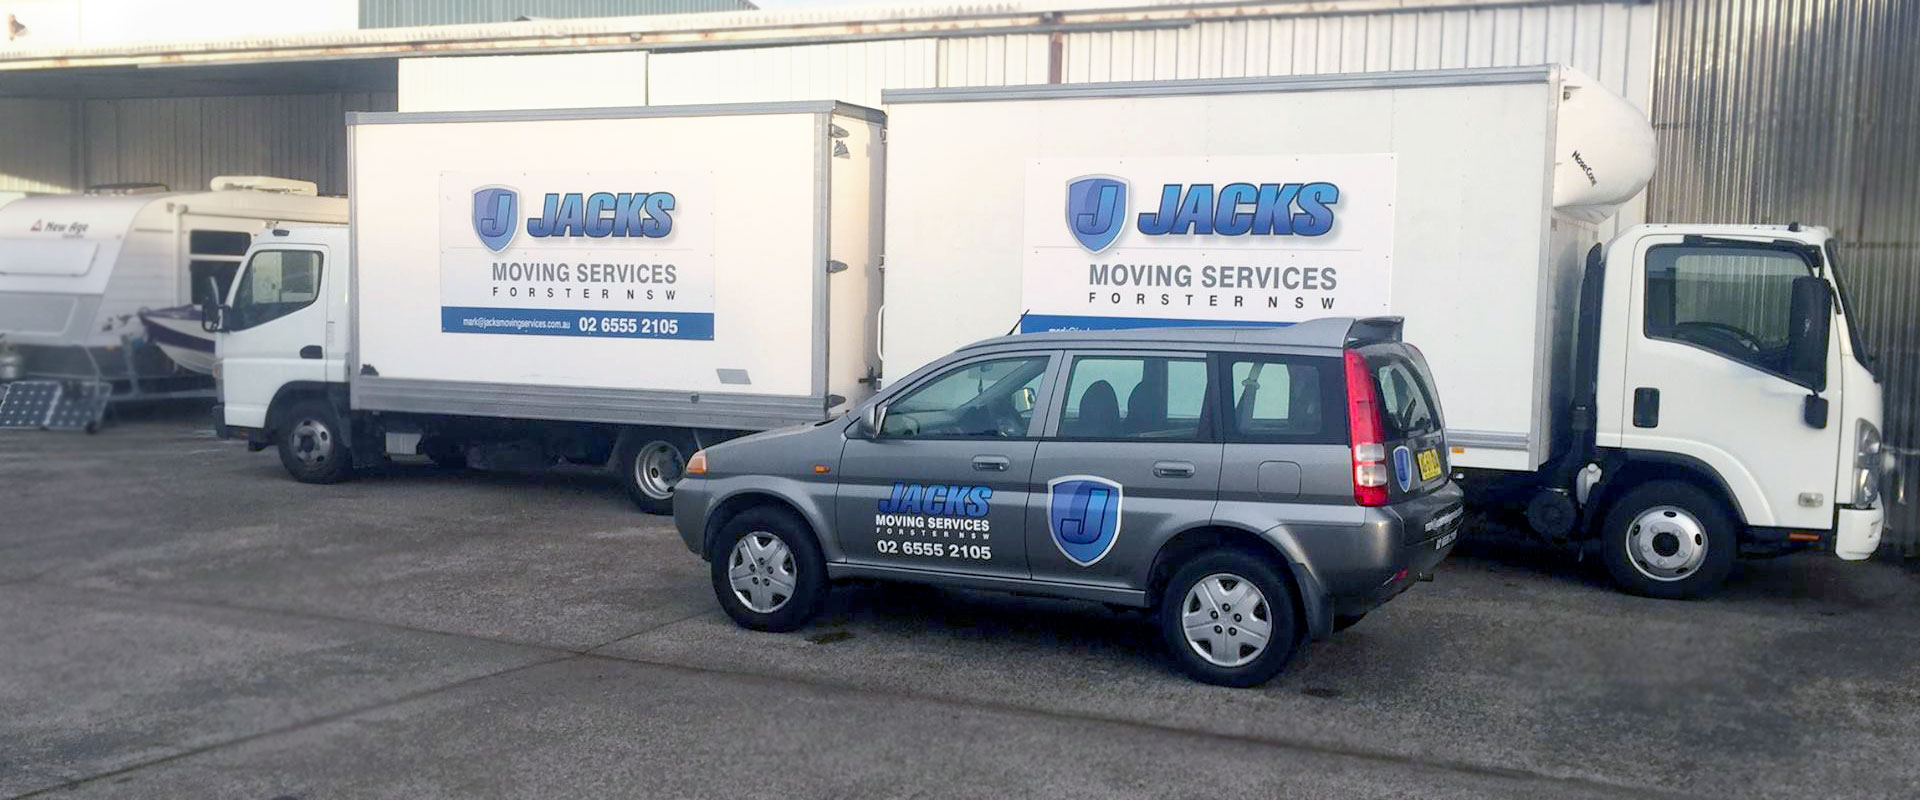 Jacks Moving Services in Forster-Tuncurry